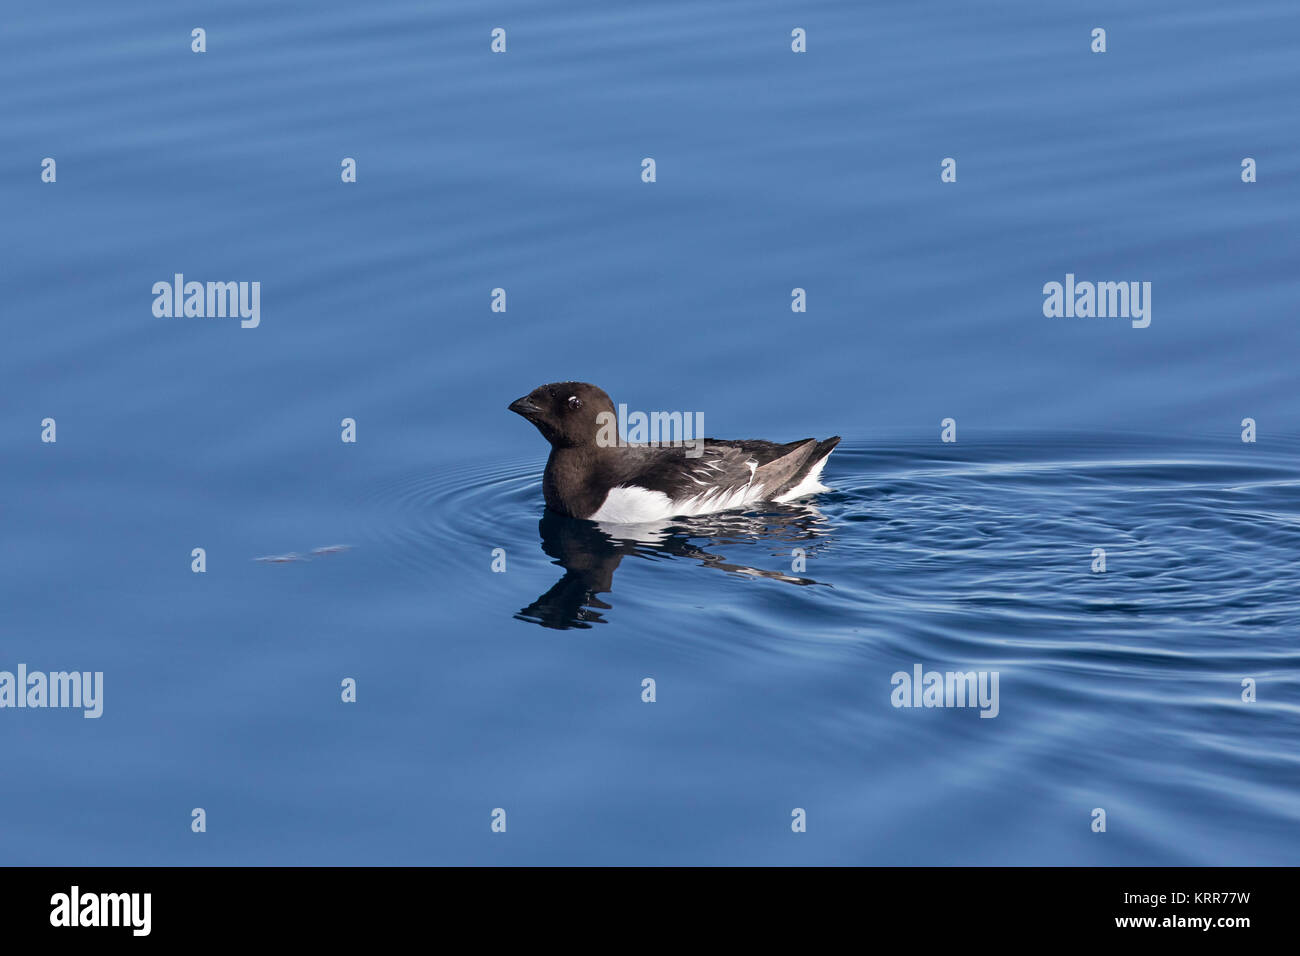 Little auk / dovekie (Alle alle) swimming in the Arctic ocean water Stock Photo